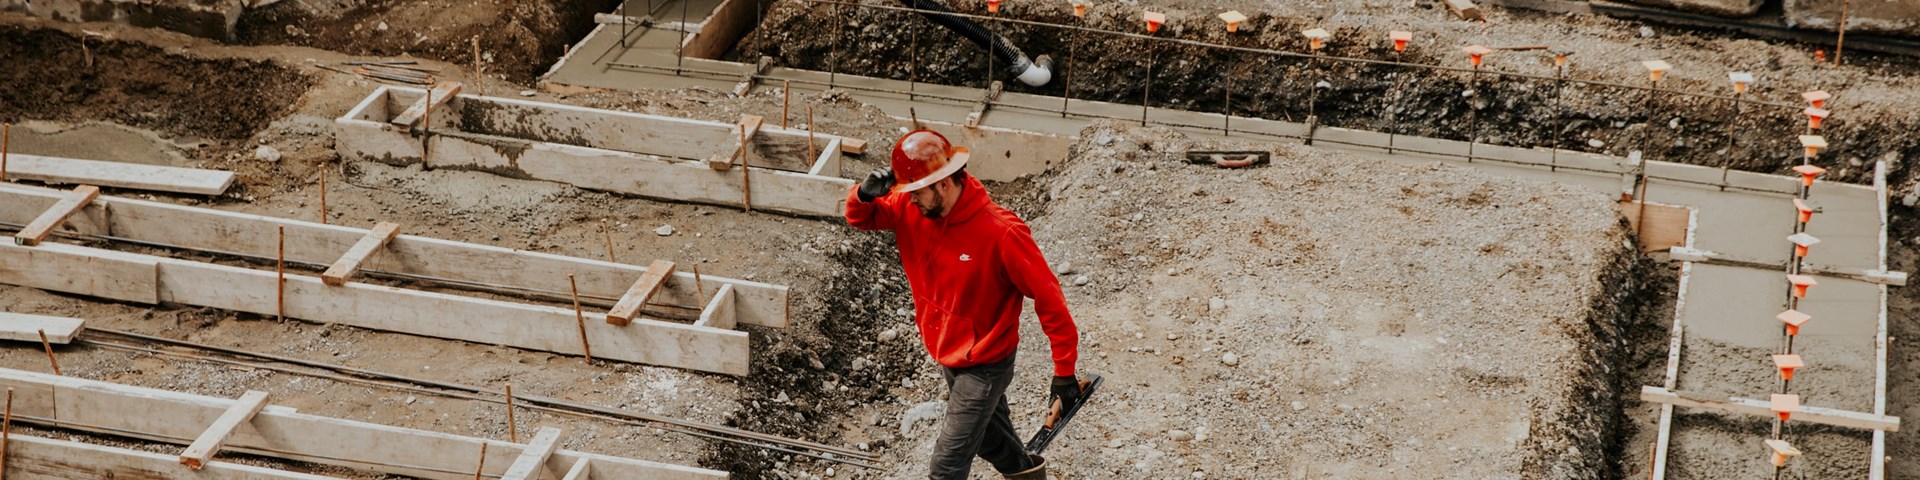 man on a construction site